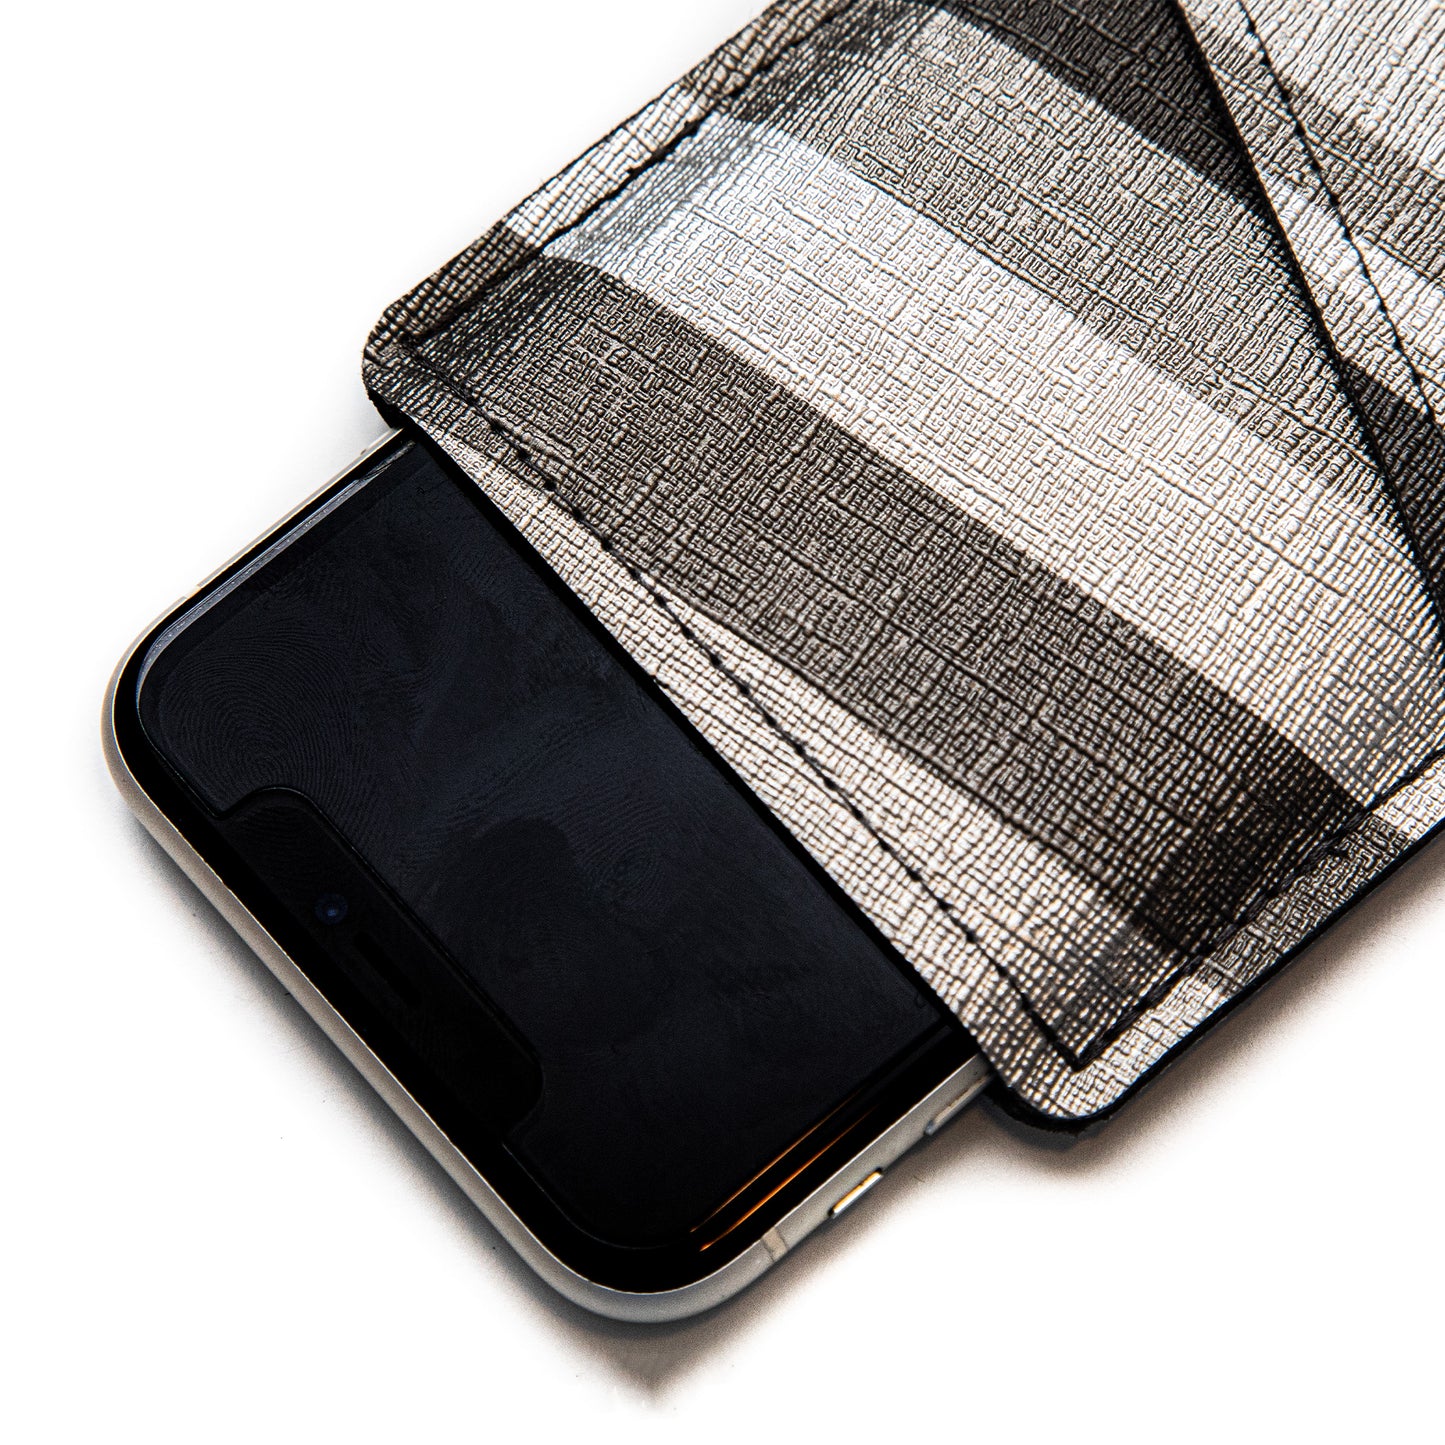 Modern Faux Leather iPhone Sleeve with Silver and Grey Patterned Design and Card Pocket